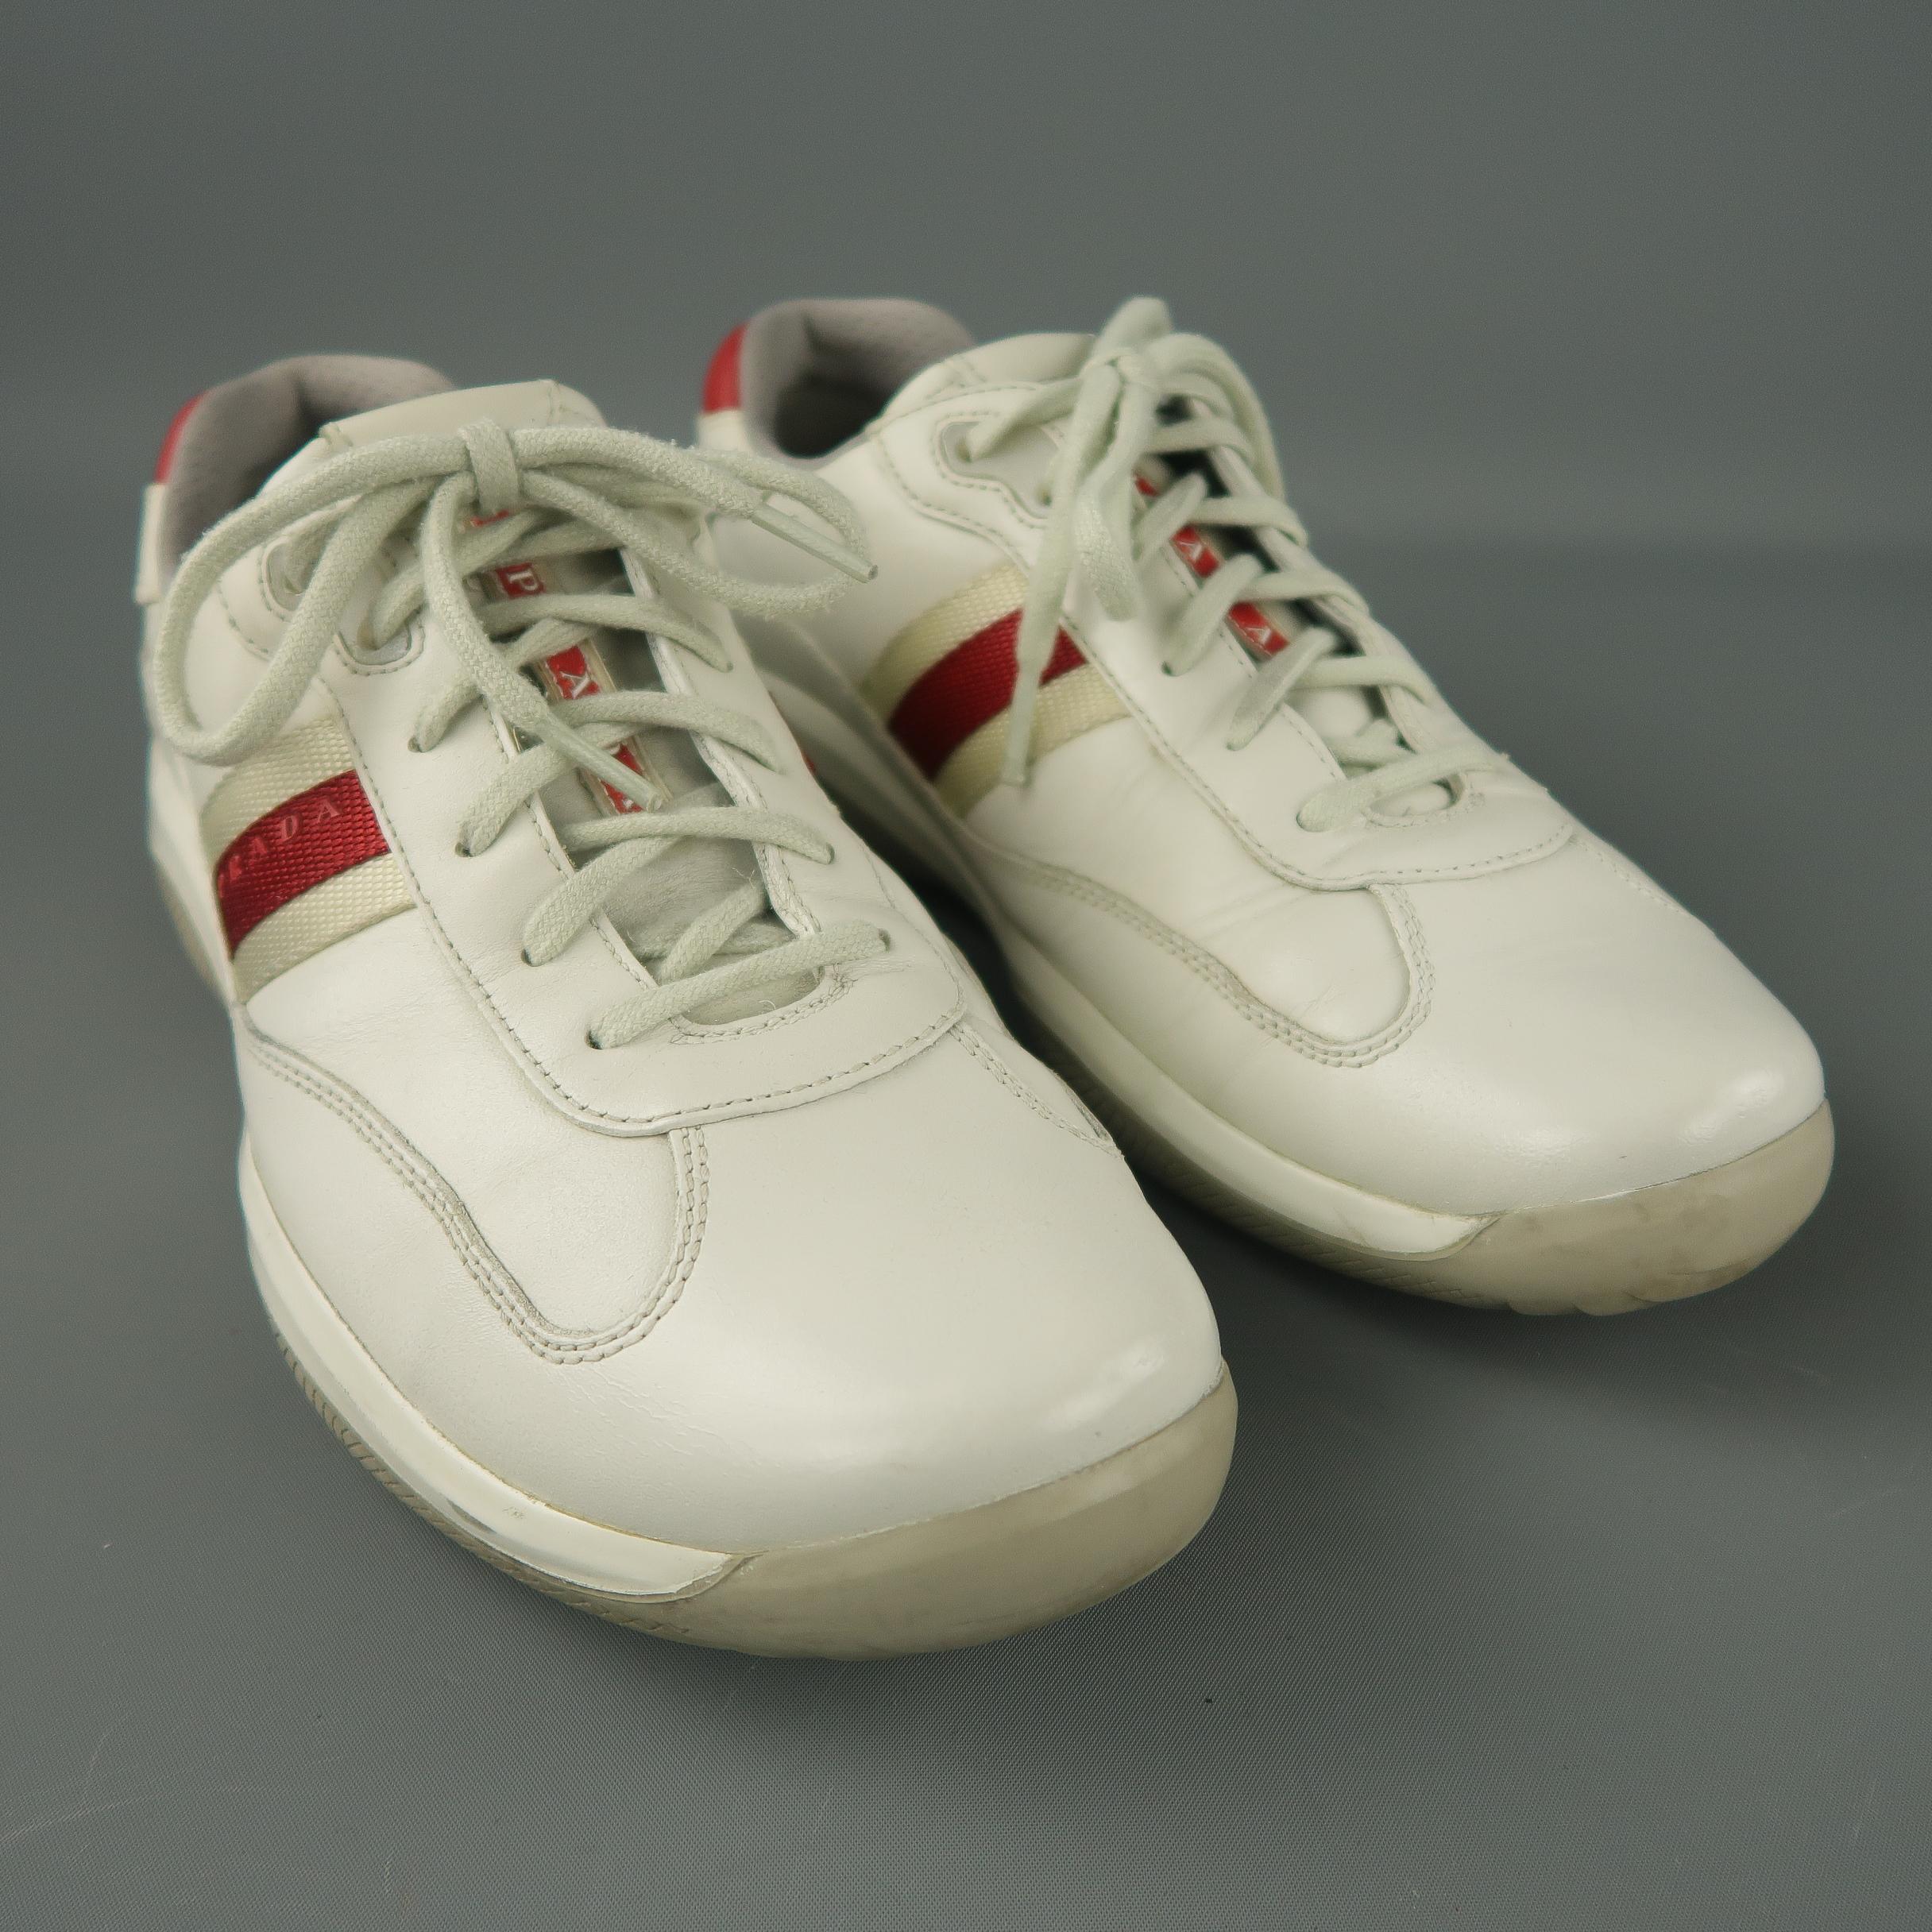 PRADA sneakers comes in a off white leather featuring a red trim detail and a rubber sole.
 
Very Good Pre-Owned Condition.
Marked: 9
 
Measurements:
 
Width: 4.5 in.
Length: 12 in.